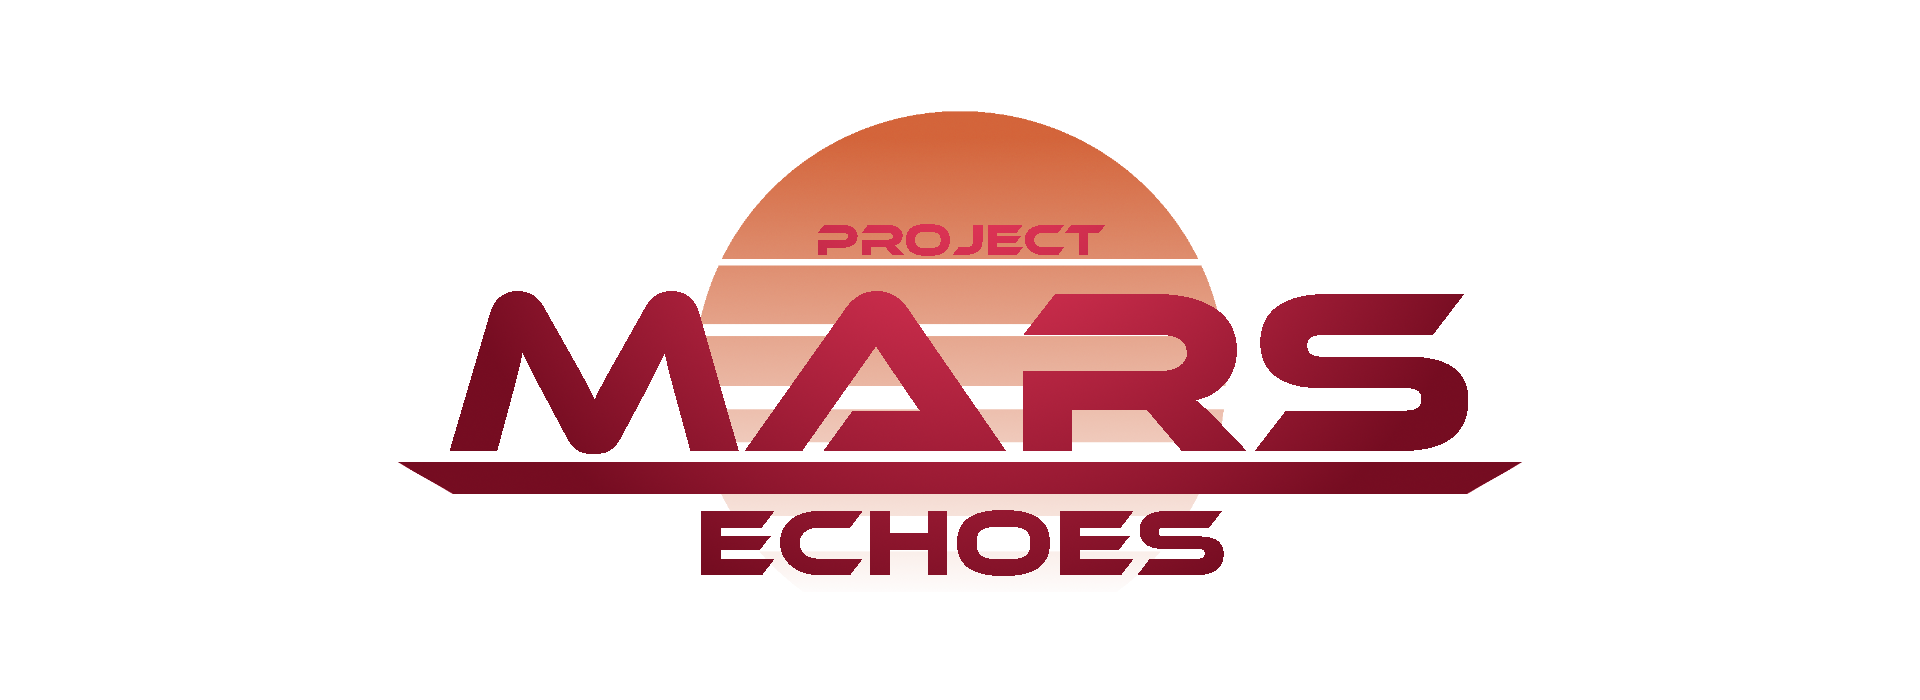 Project MARS: Echoes